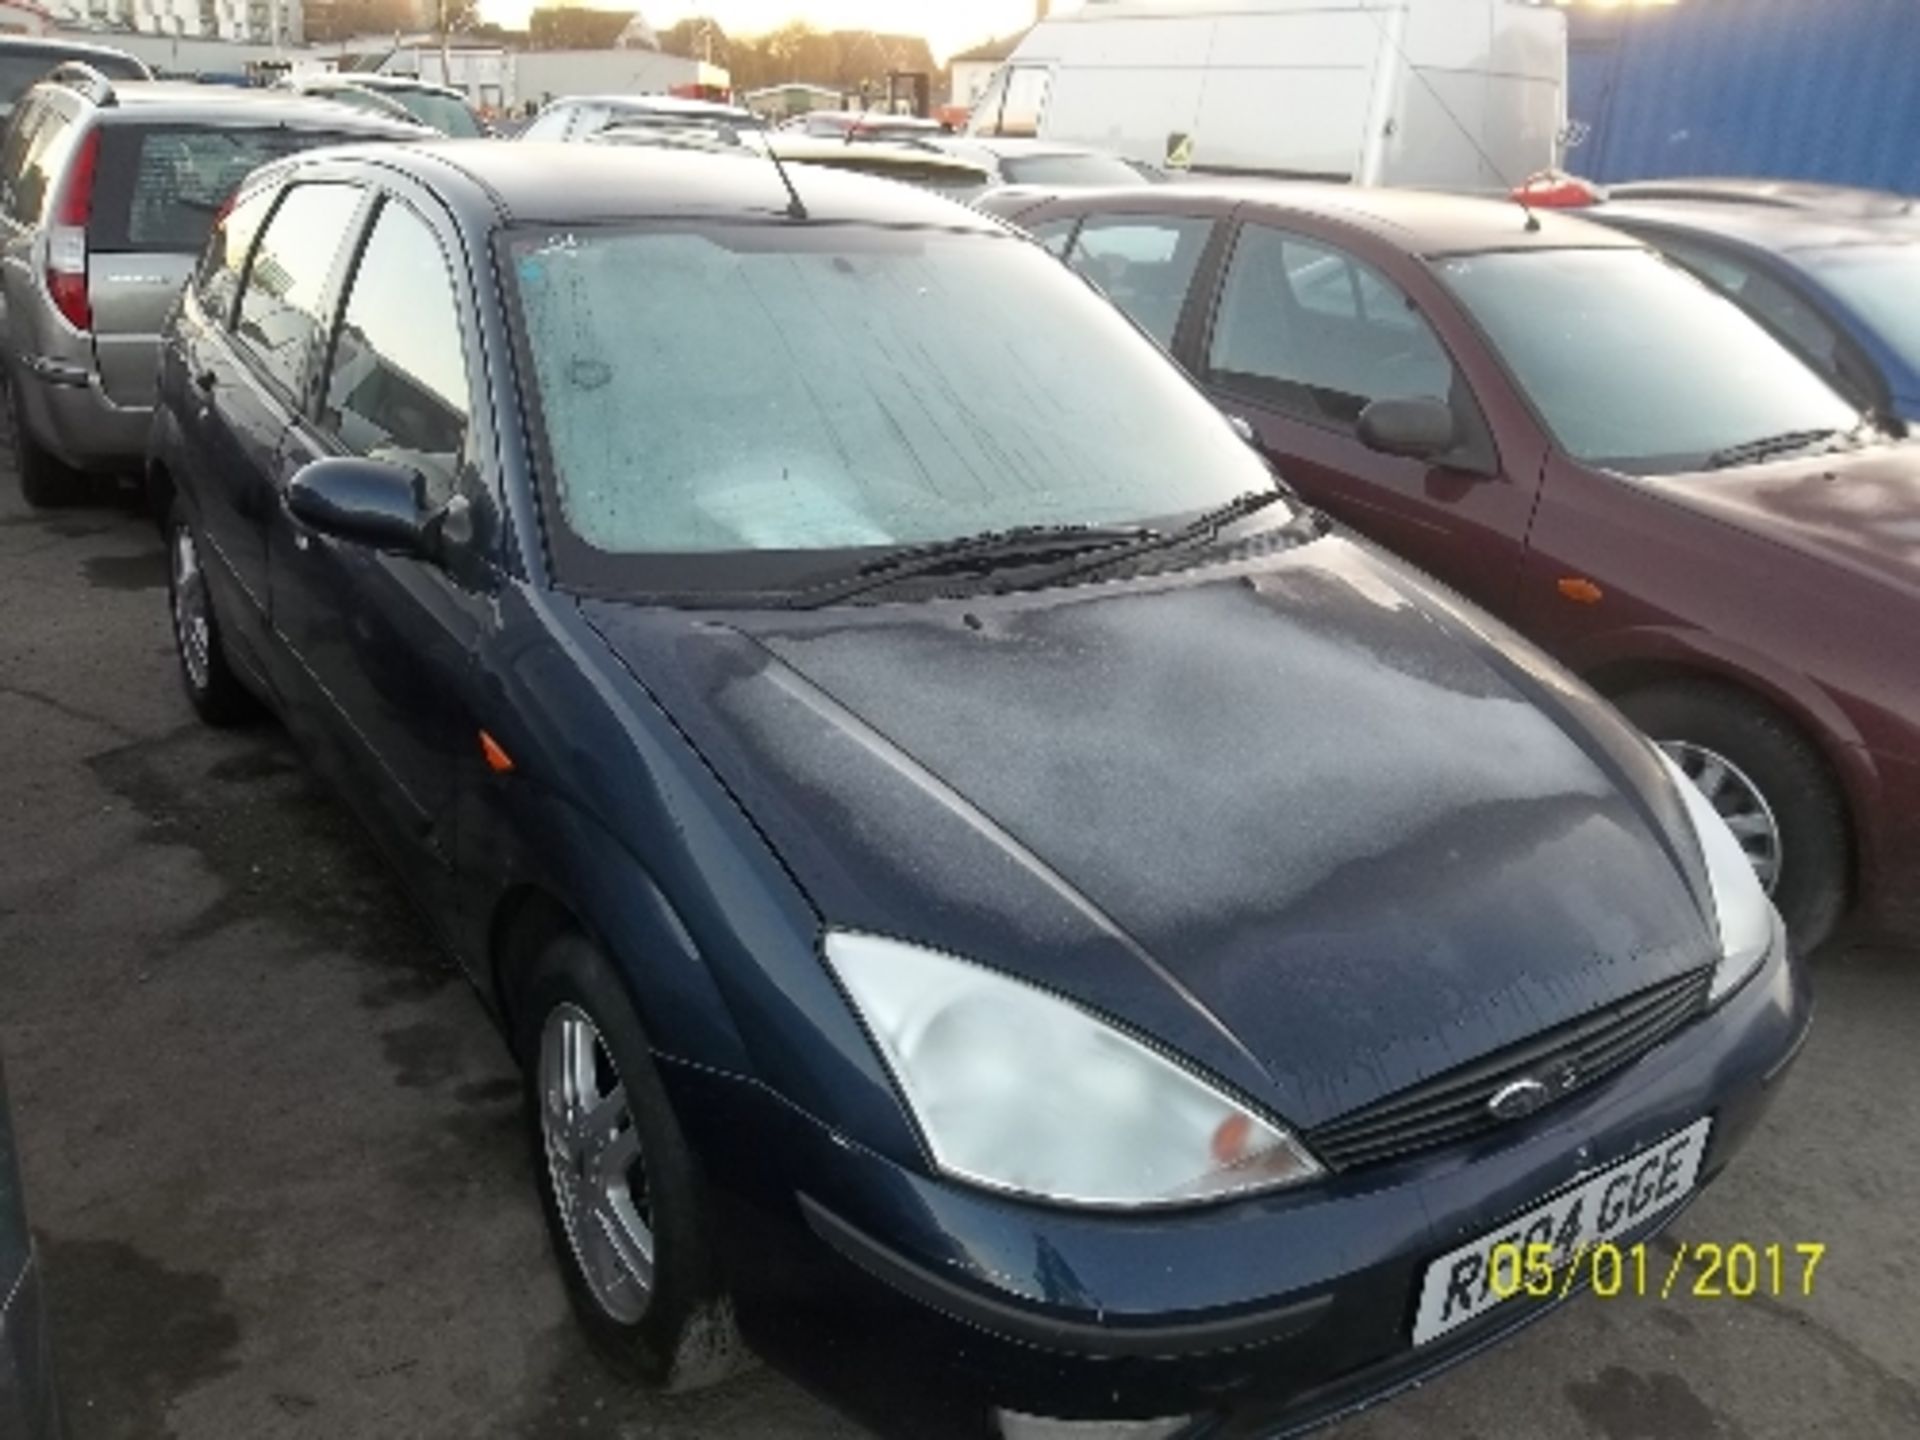 Ford Focus Zetec - RF04 GGE Date of registration: 08.07.2004 1596cc, petrol, 4 speed automatic, blue - Image 2 of 4